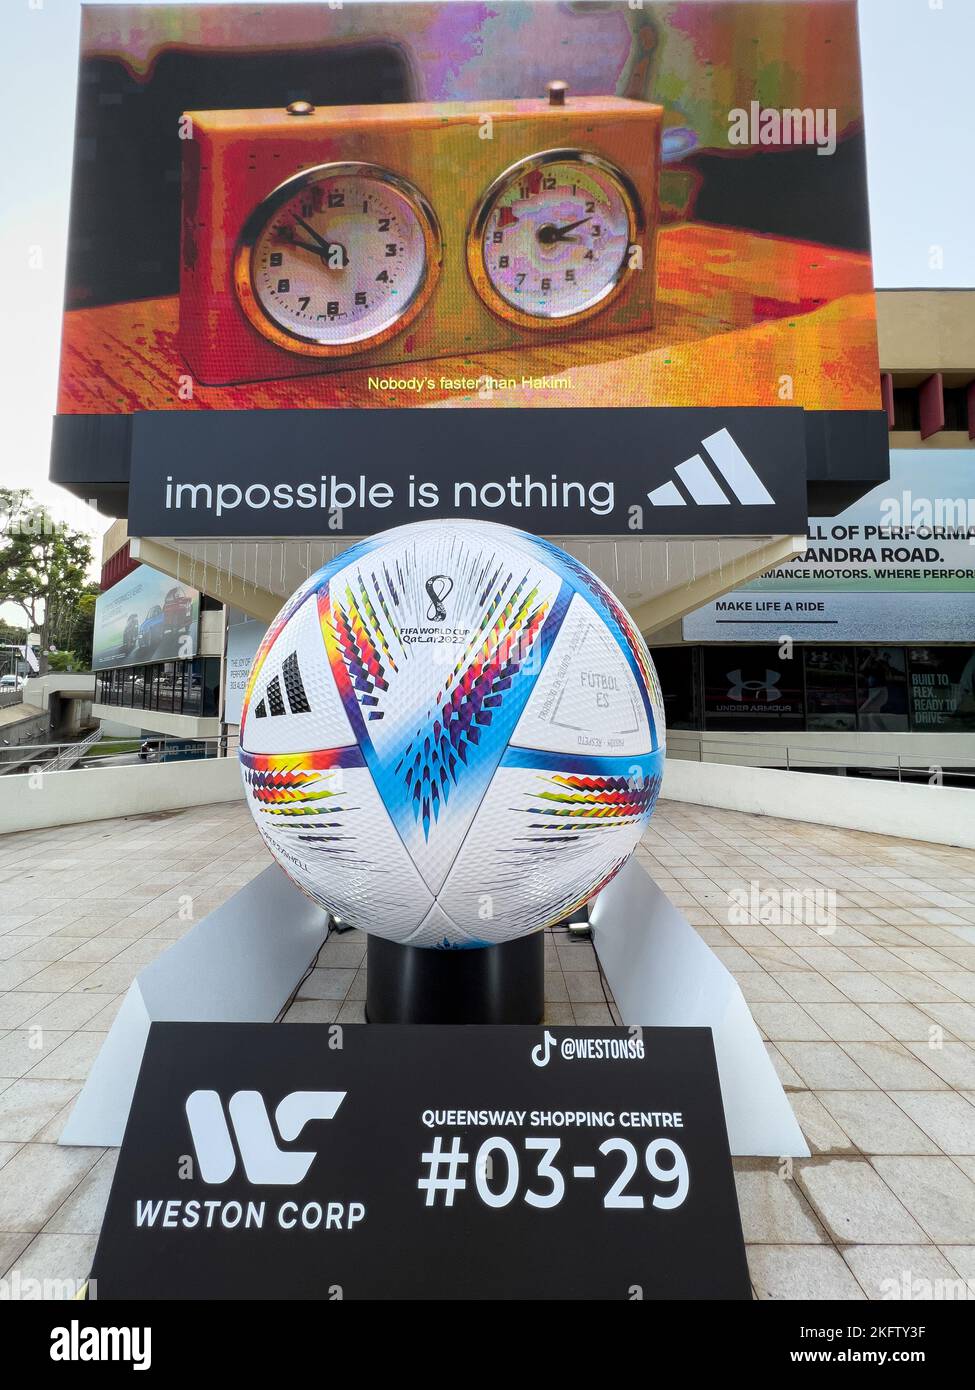 Giant size of FIFA World Cup Qatar 2022 official football on display in public area. The ball is name 'Al Rihla', meaning The Journey in Arabic. Stock Photo